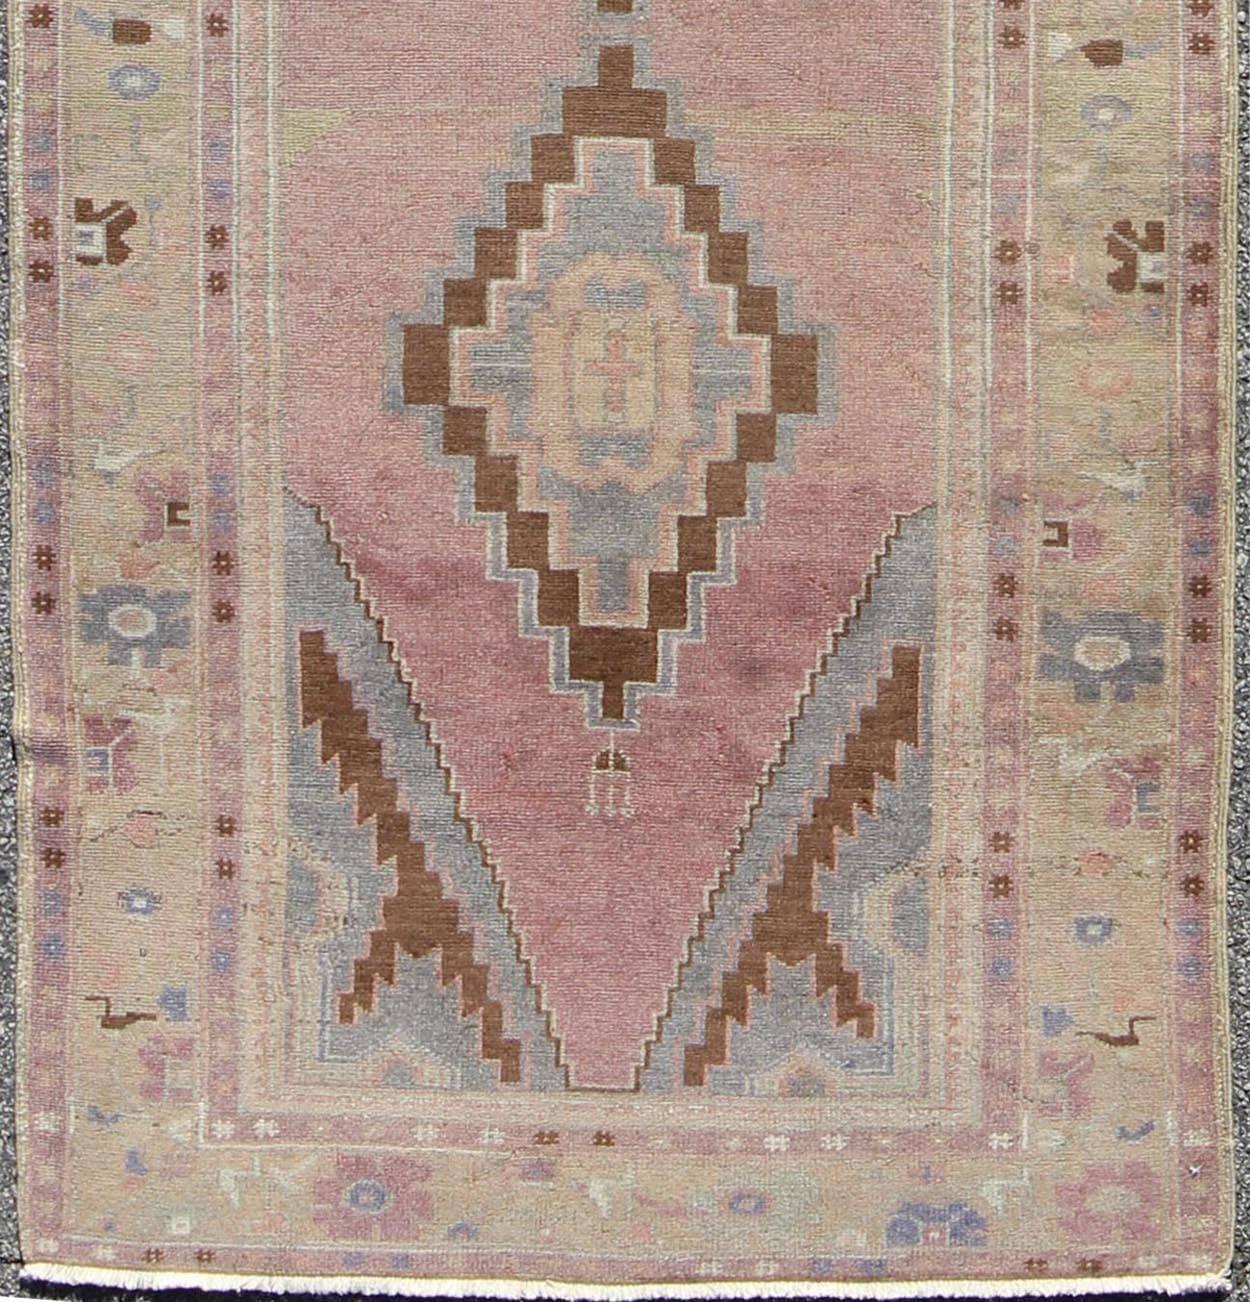 Midcentury Turkish Oushak rug with diamond medallions in lavender, pink, brown, cream and blue rug tu-ugu-136009, country of origin / type: Turkey / Oushak, circa 1950.

This beautiful vintage Oushak runner from 1950s Turkey features a geometric